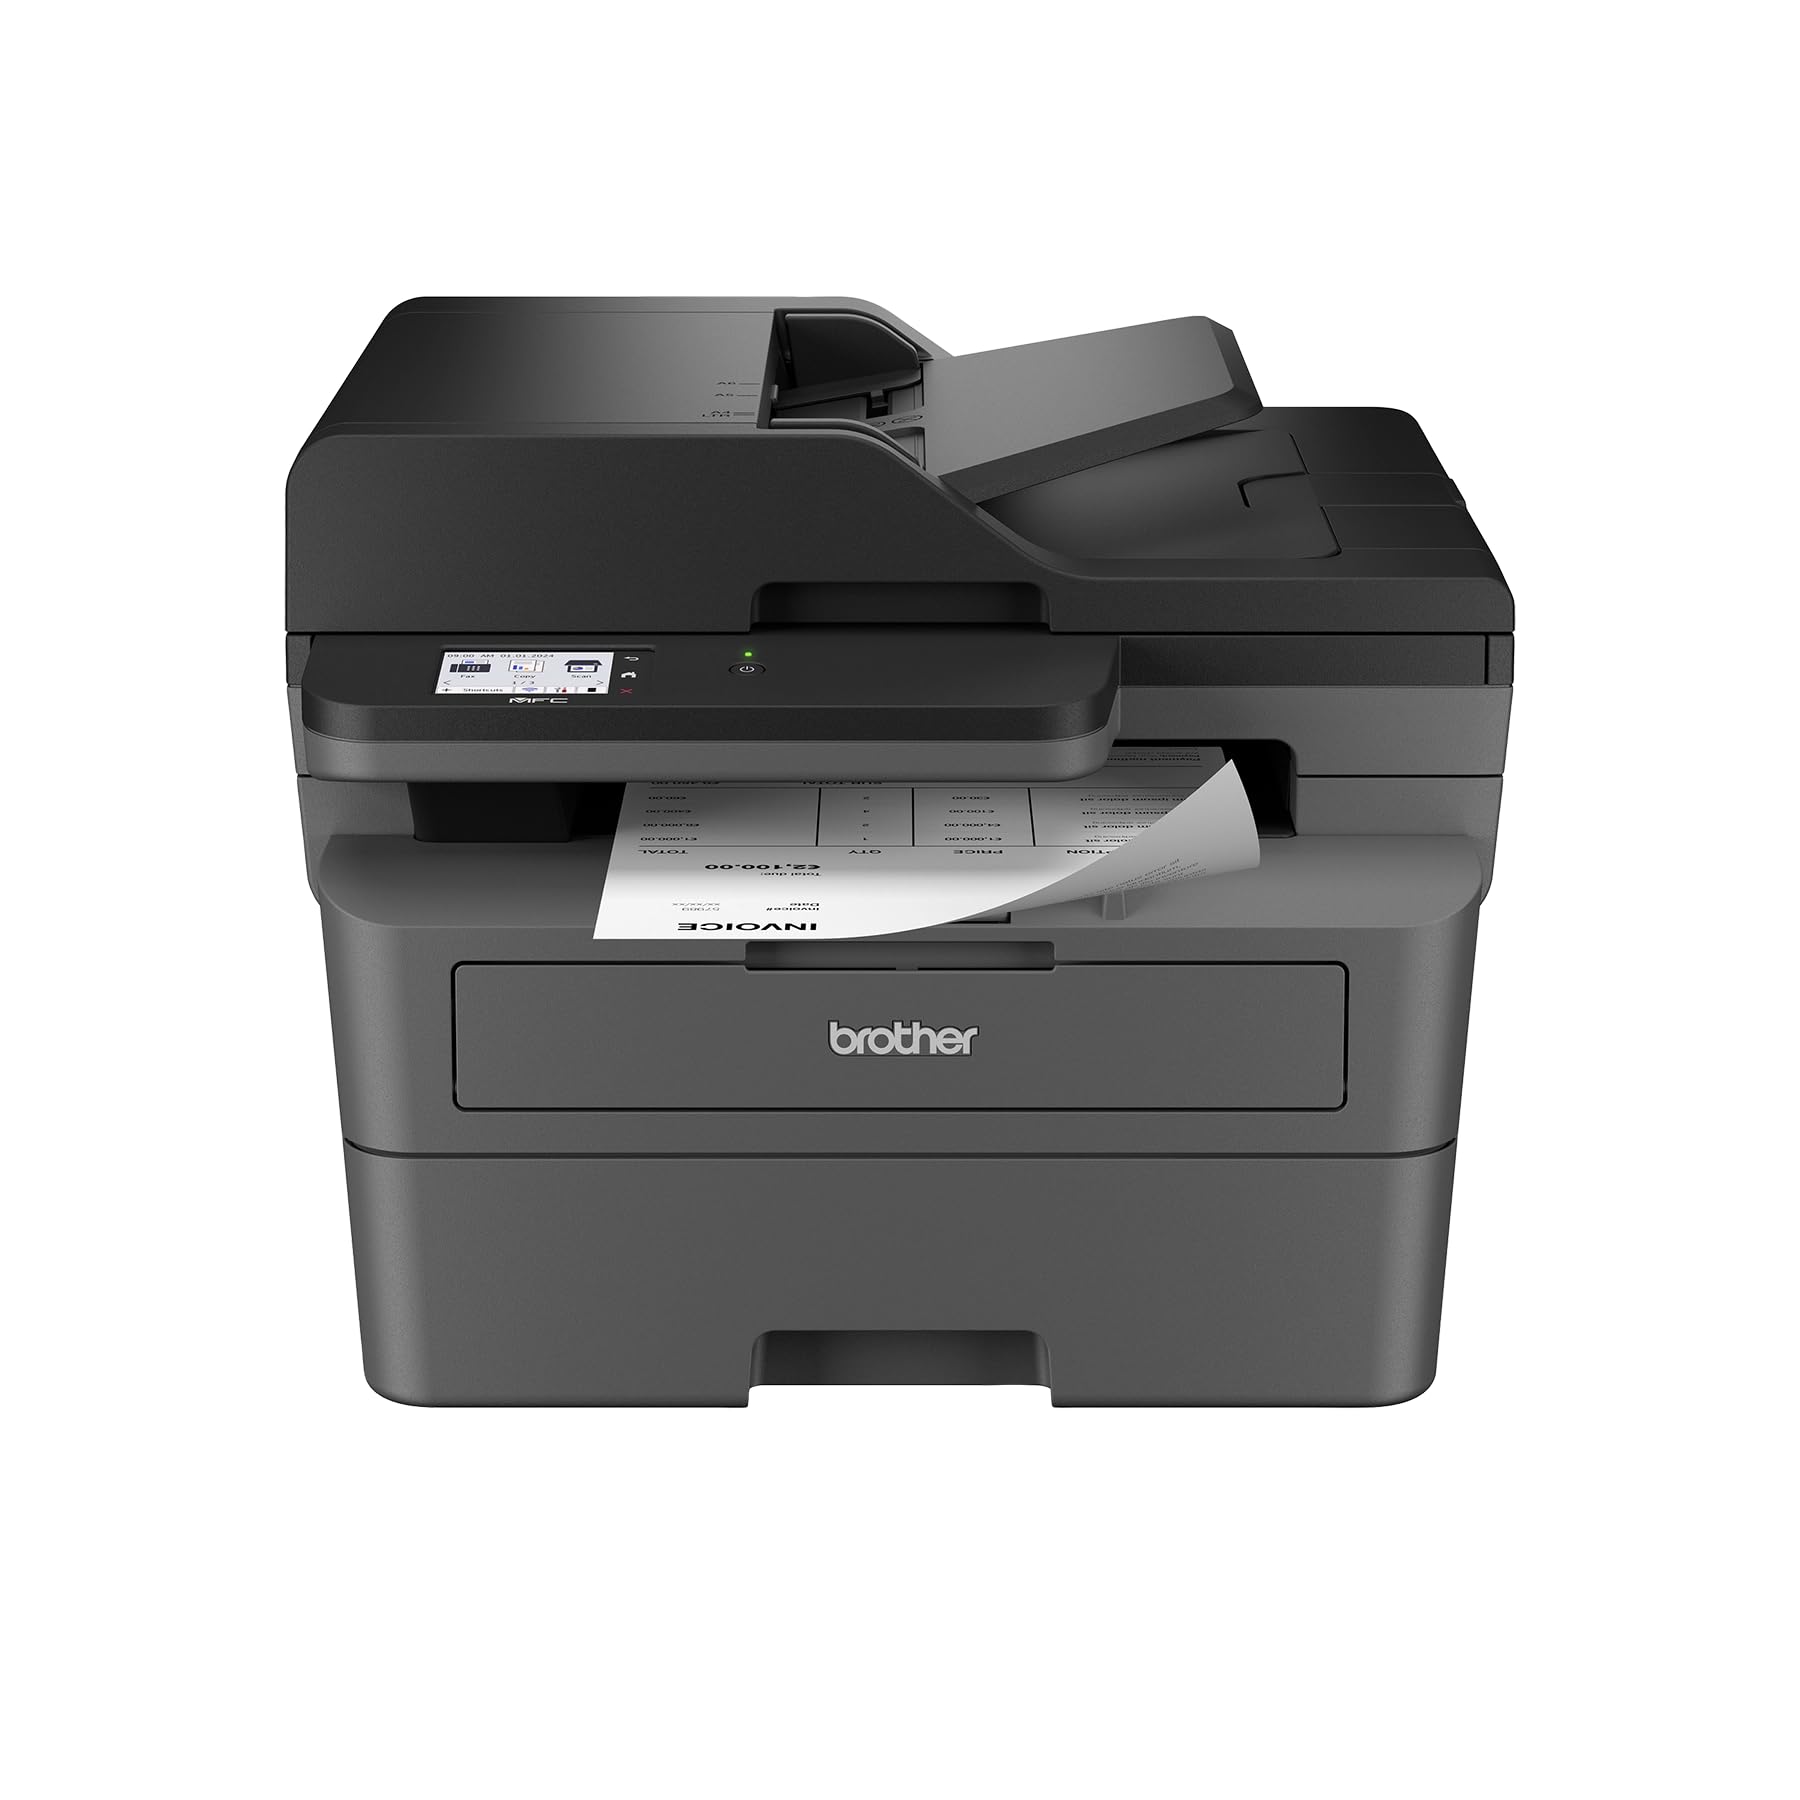 Brother MFC-L2820DW XL Wireless Compact Monochrome All-in-One Laser Printer with Copy, Scan and Fax, Duplex, Black & White | Up to 4,200 Pages of Toner Included(1), Amazon Dash Replenishment Ready